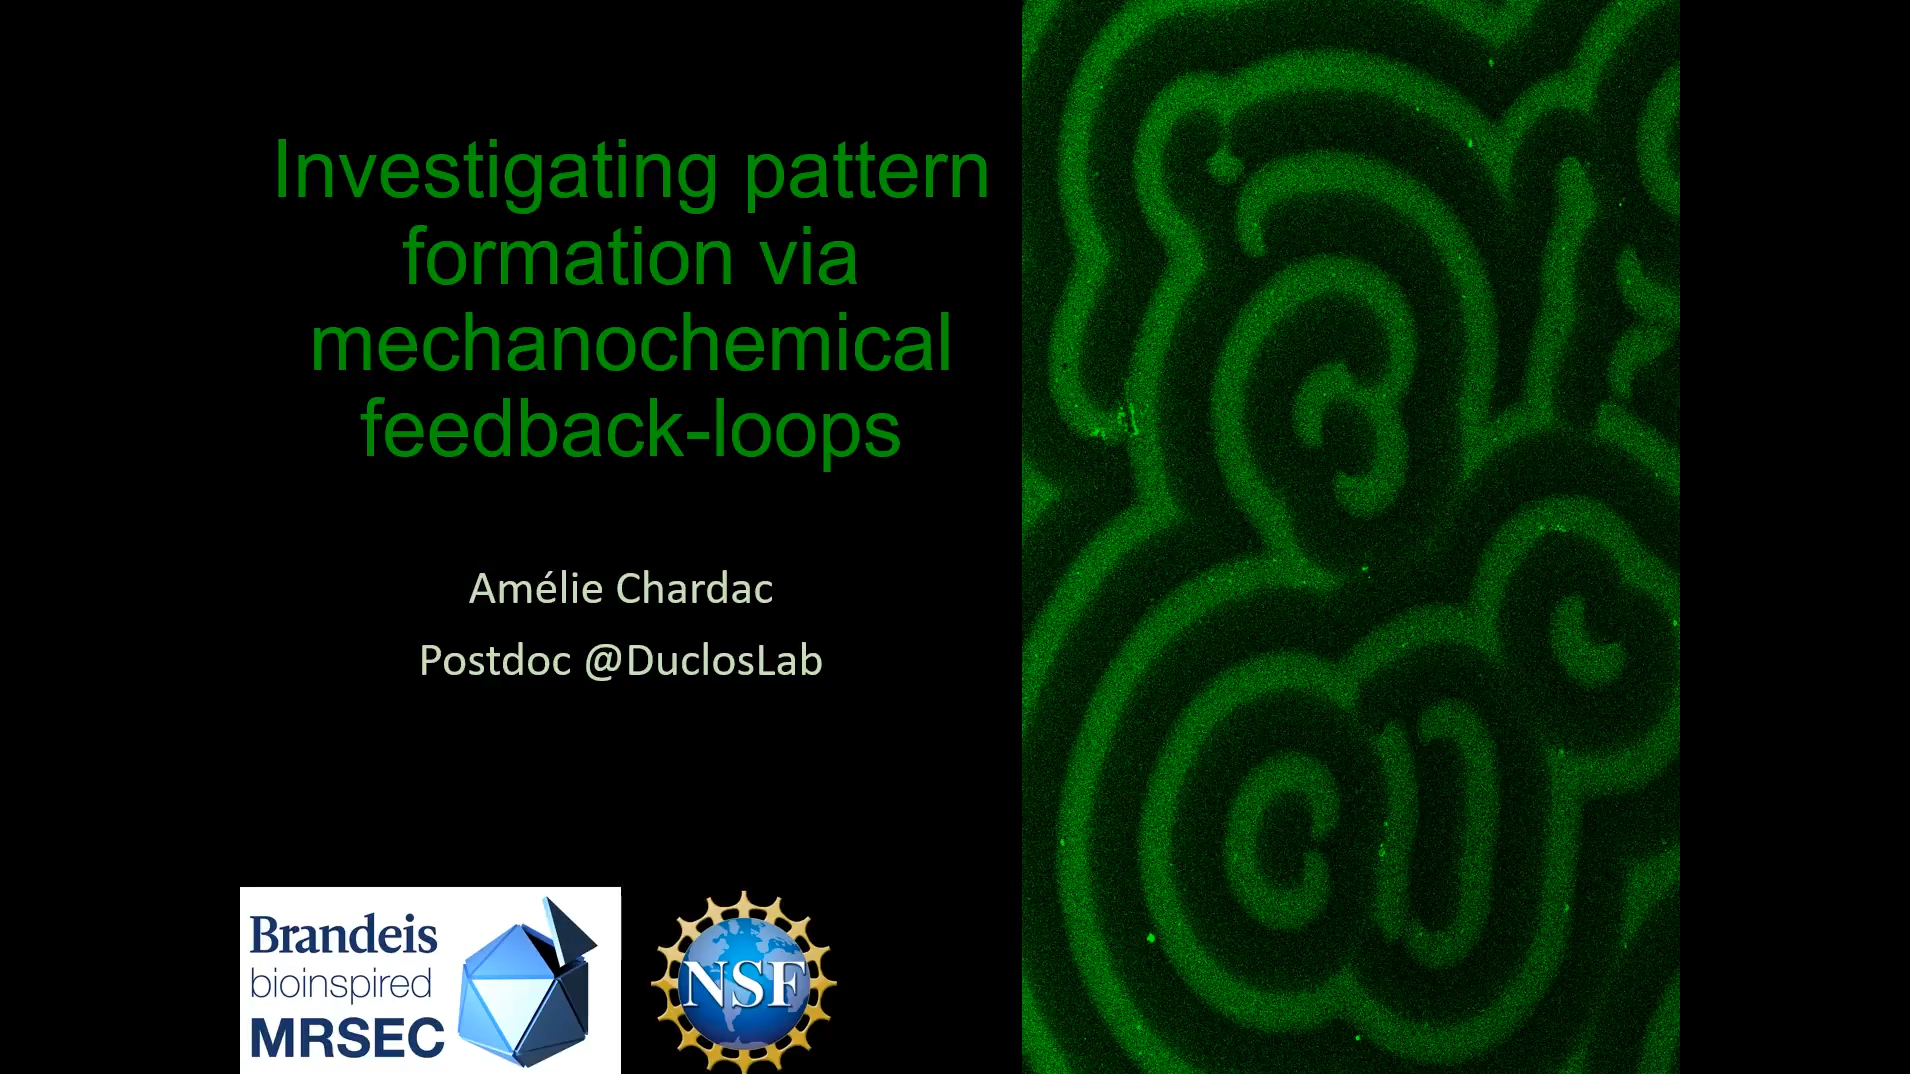 2022 Runner Up: Postdoc Dr. Amélie Chardac for "Investigating pattern formation via mechanochemical feedback-loops"